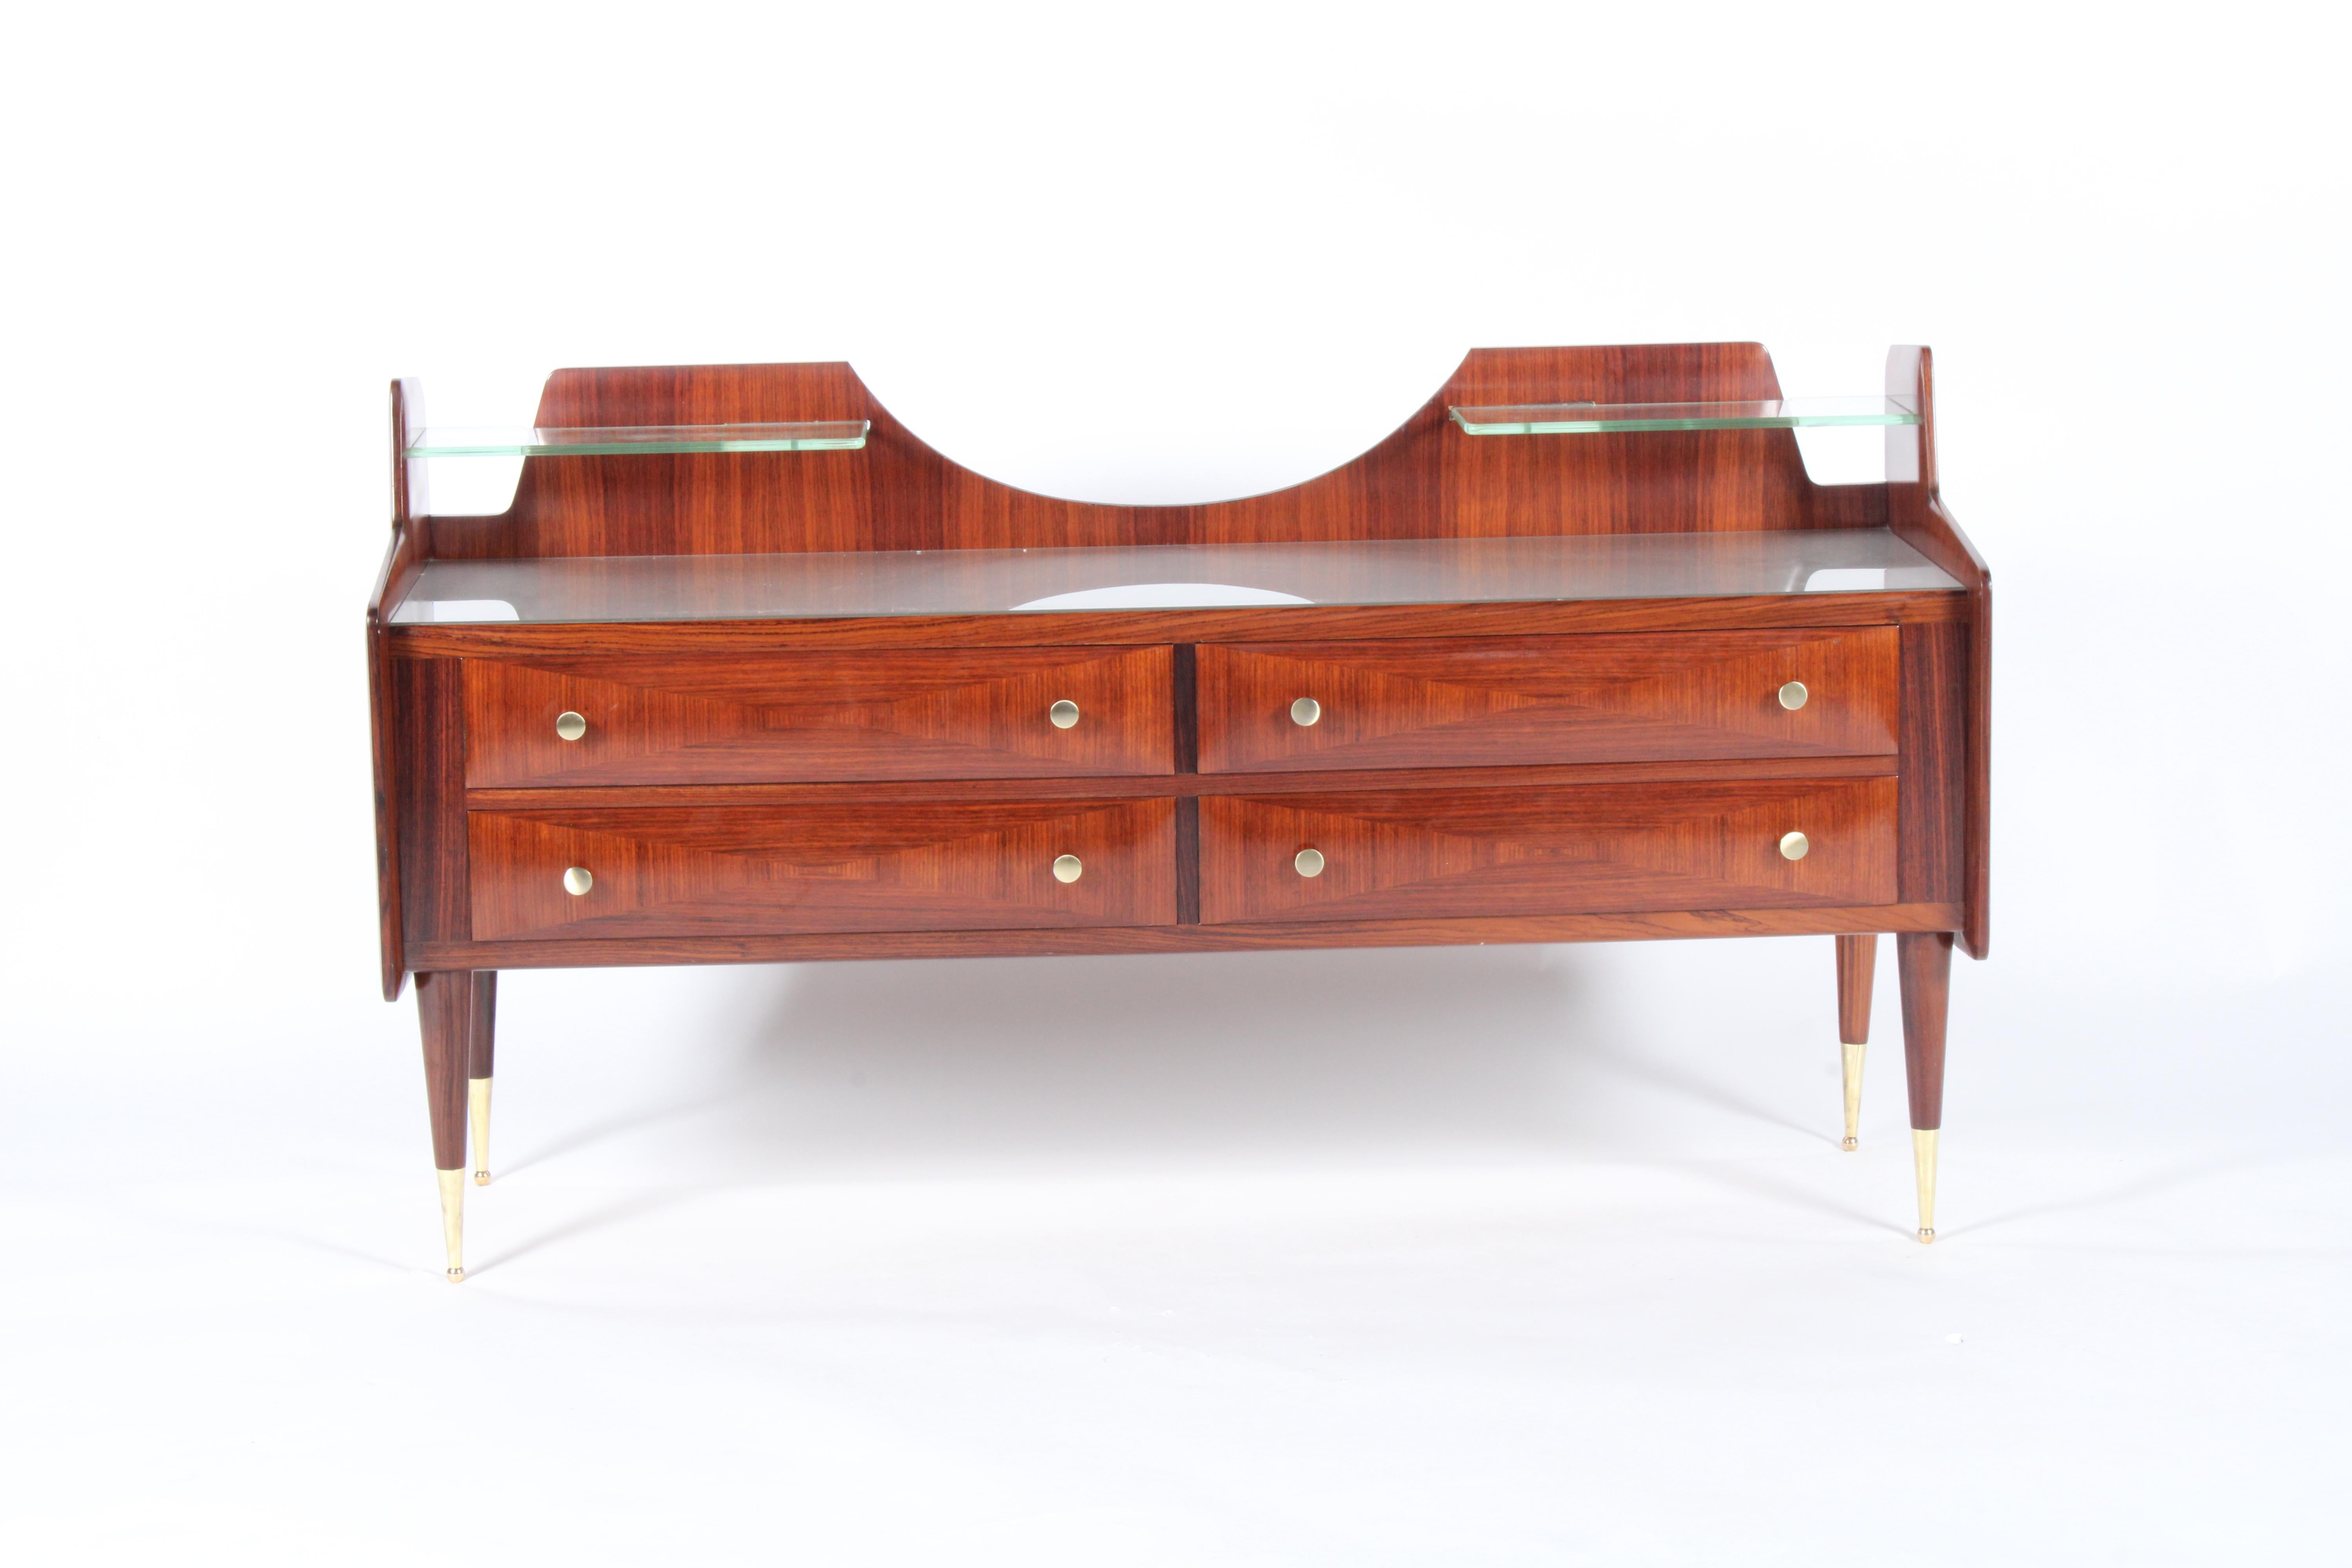 Stunning original mid century Italian credenza / chest of drawers, with exquisite grain pattern and a rich color this piece will look amazing in a wide range of different bedroom styles or equally as good as a sideboard in a hallway or sitting room.